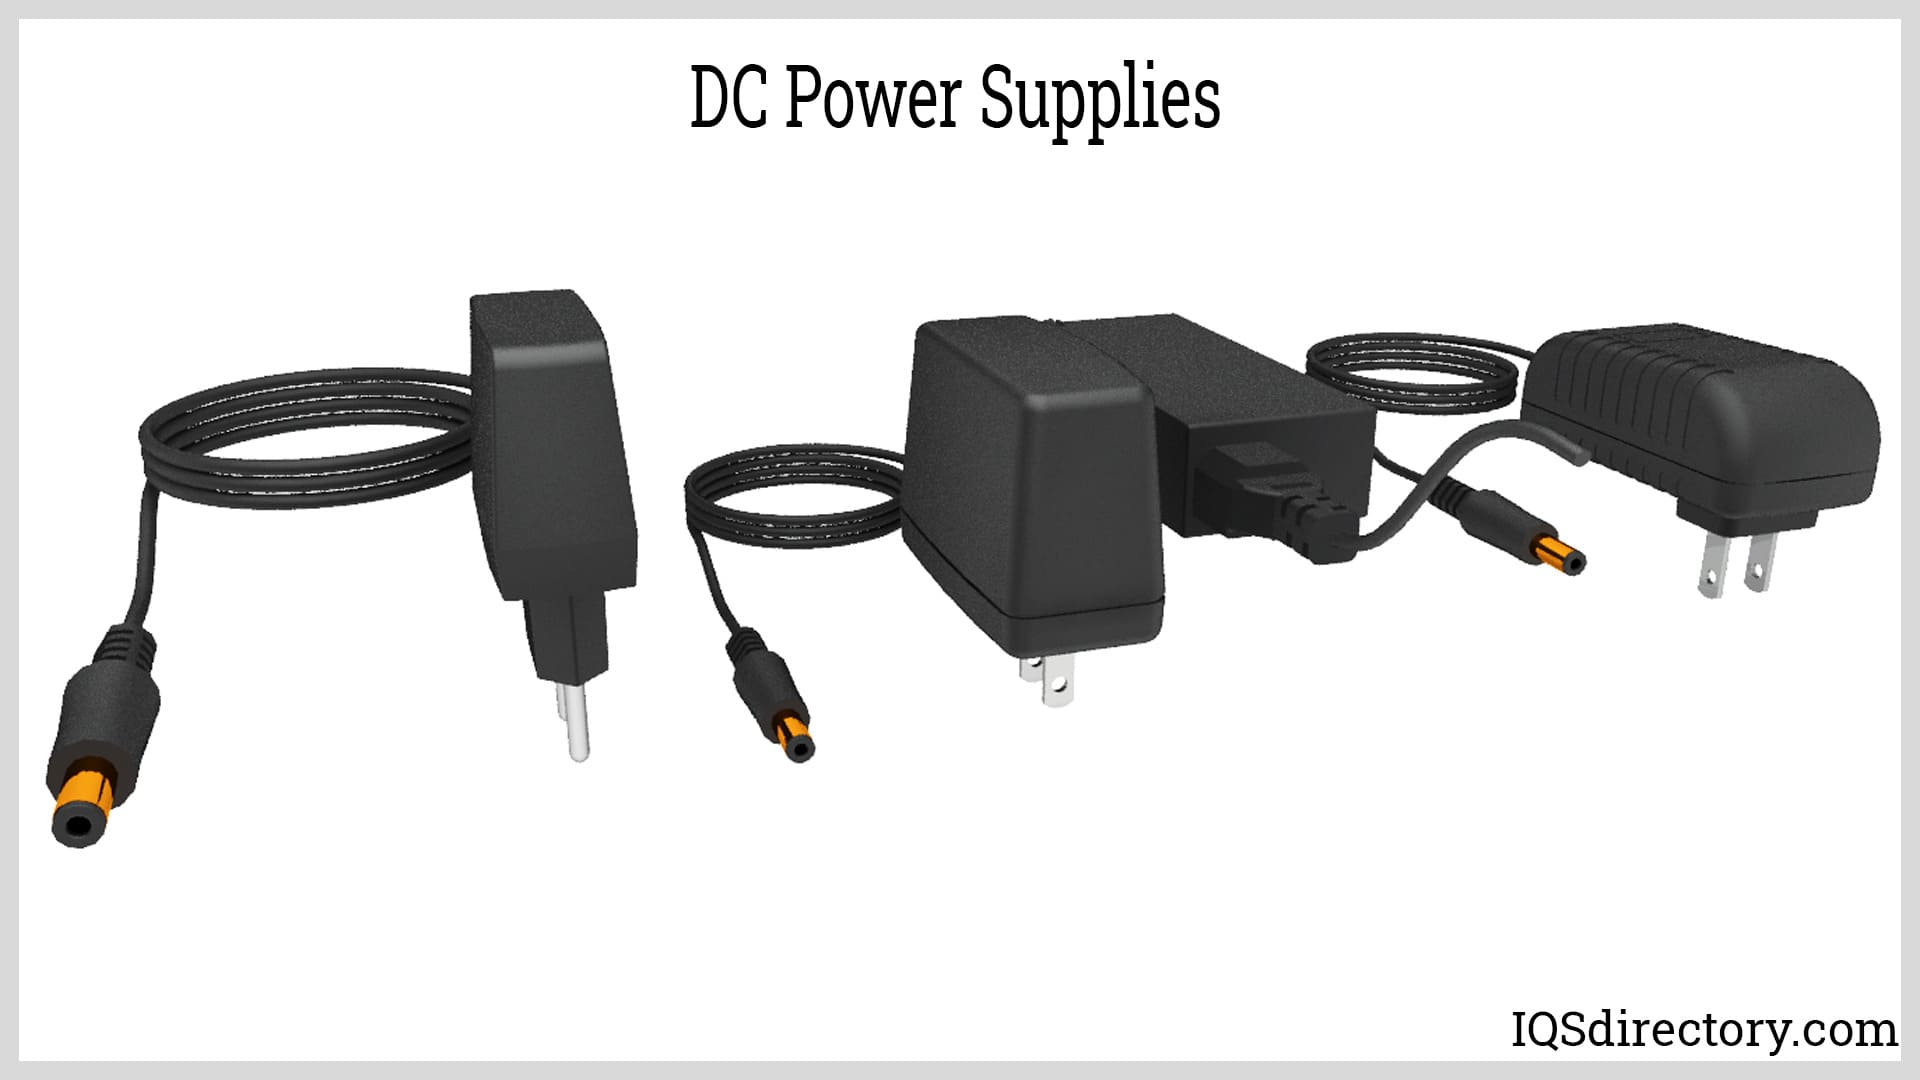 Tolk Skab Folde DC Power Supply: What Is It? Where Is It Used? AC vs. DC